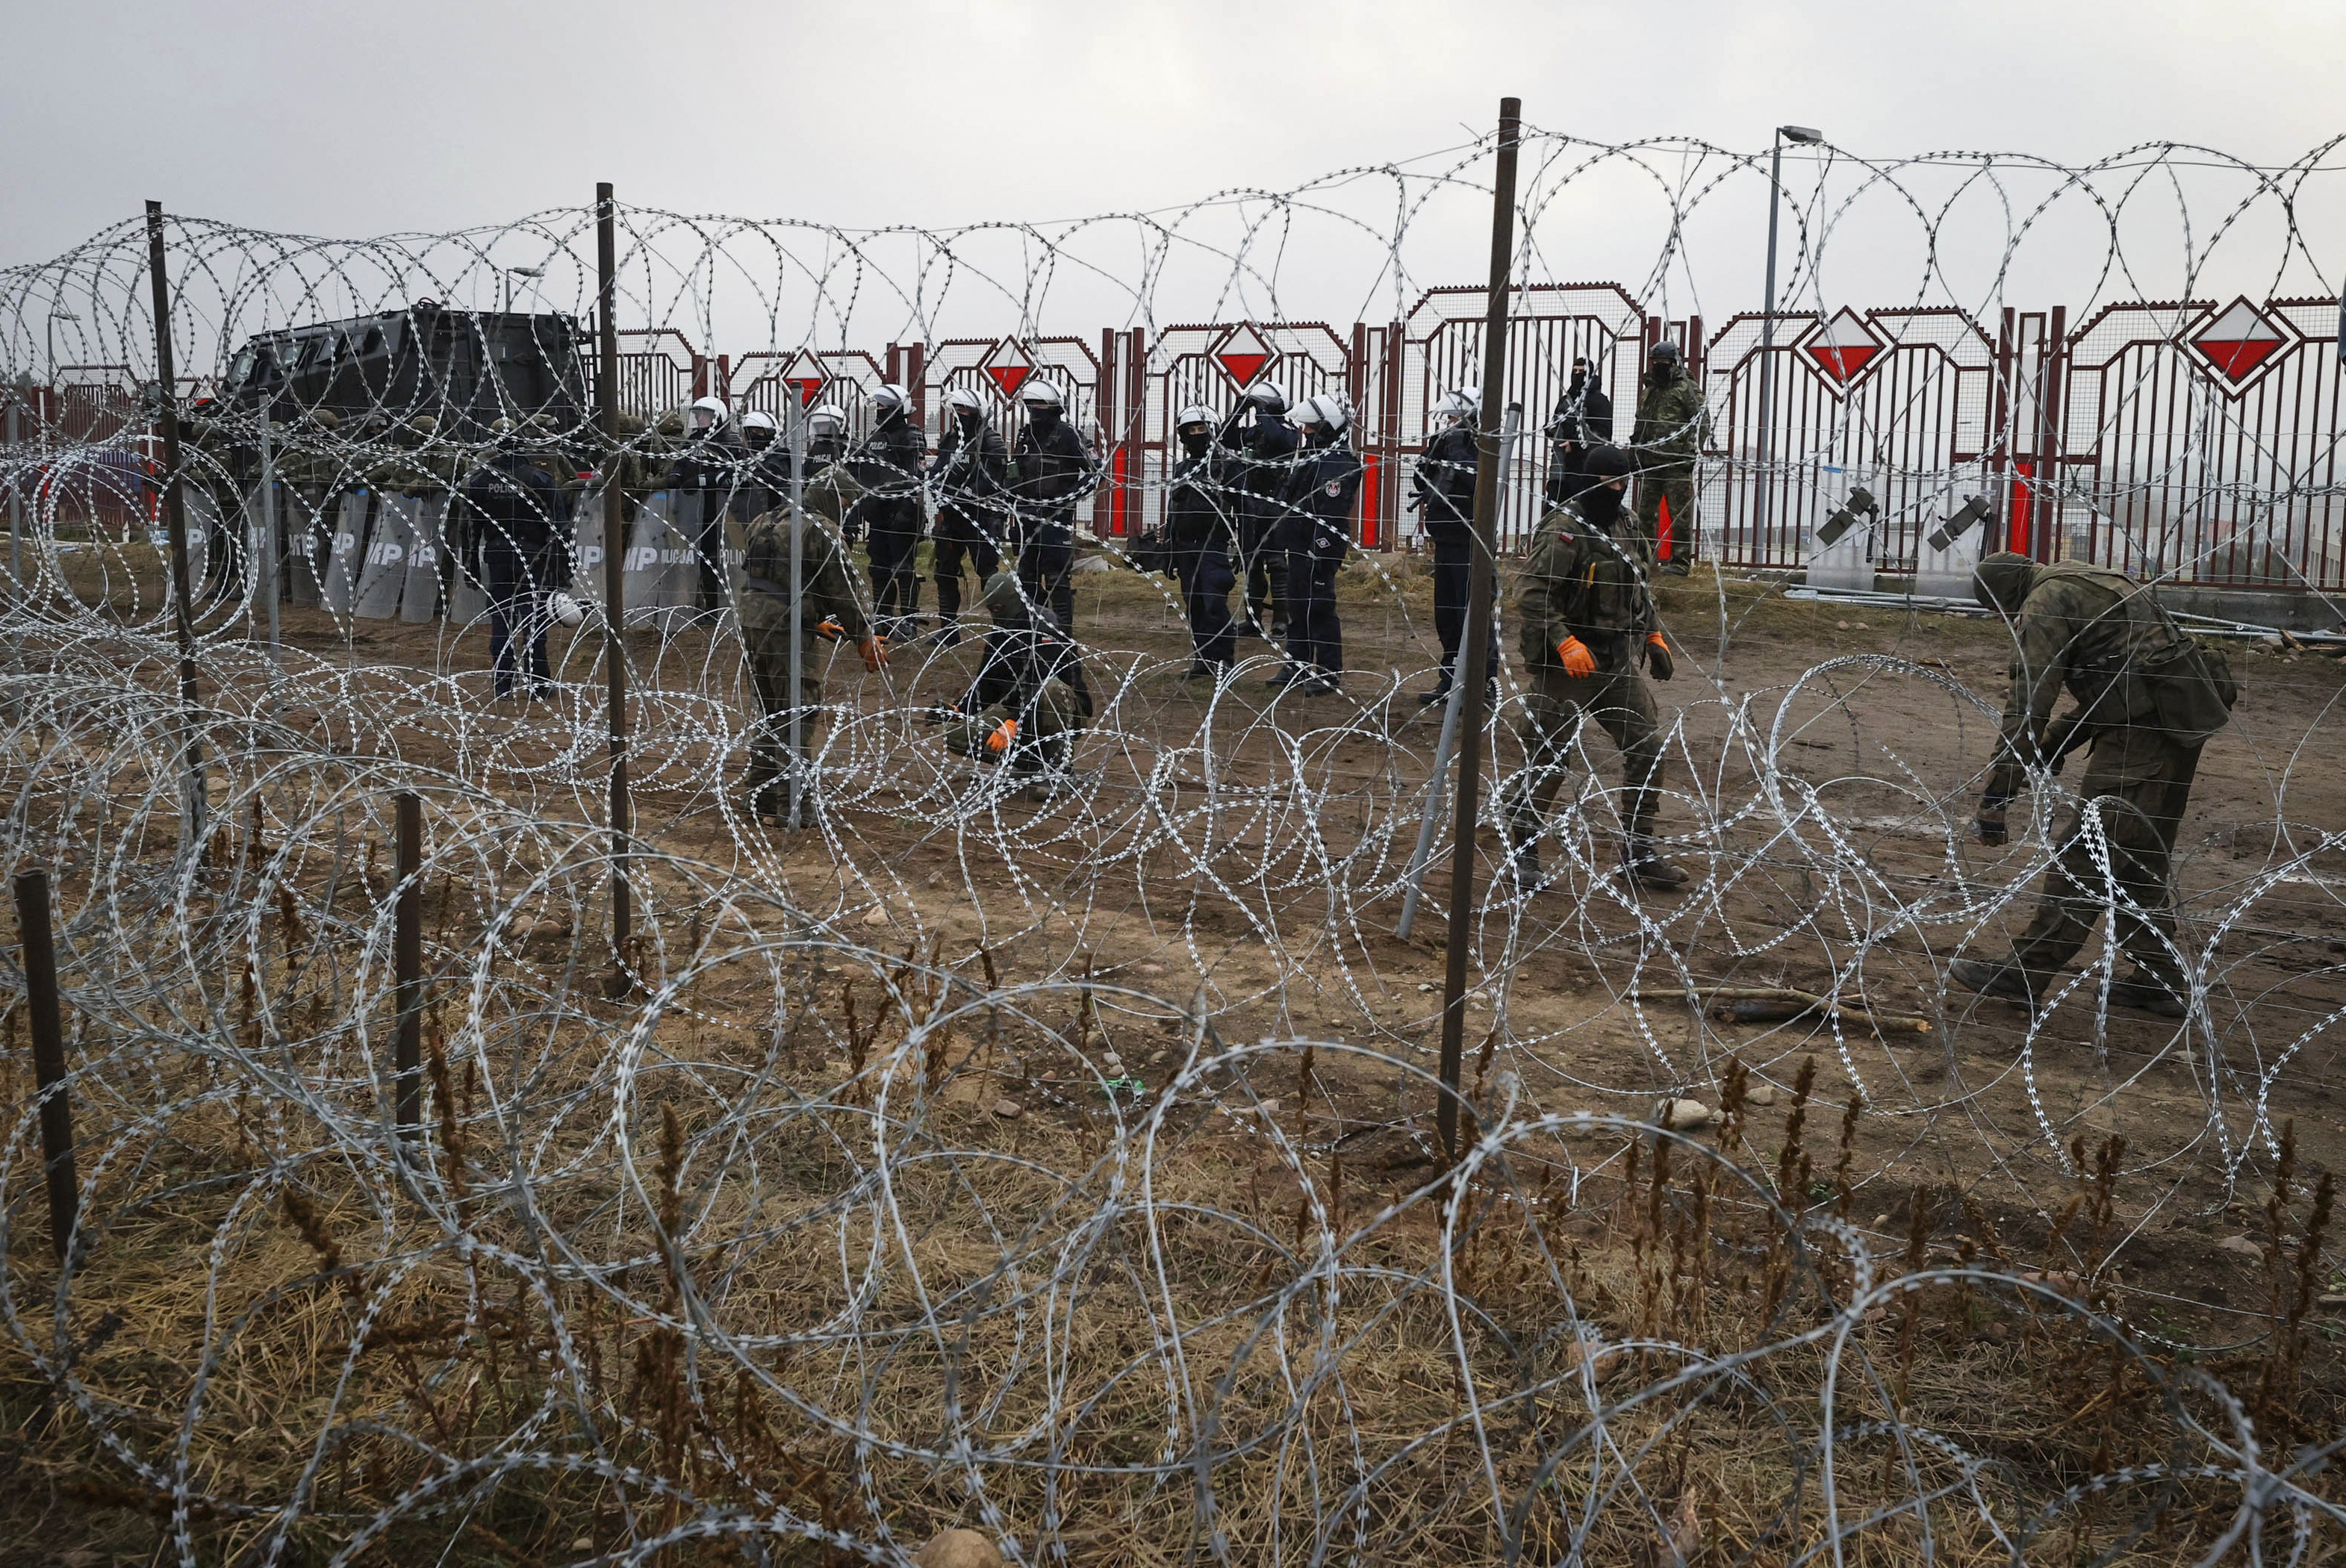 The Wider Implications of the Tensions at the Belarus-Polish Border